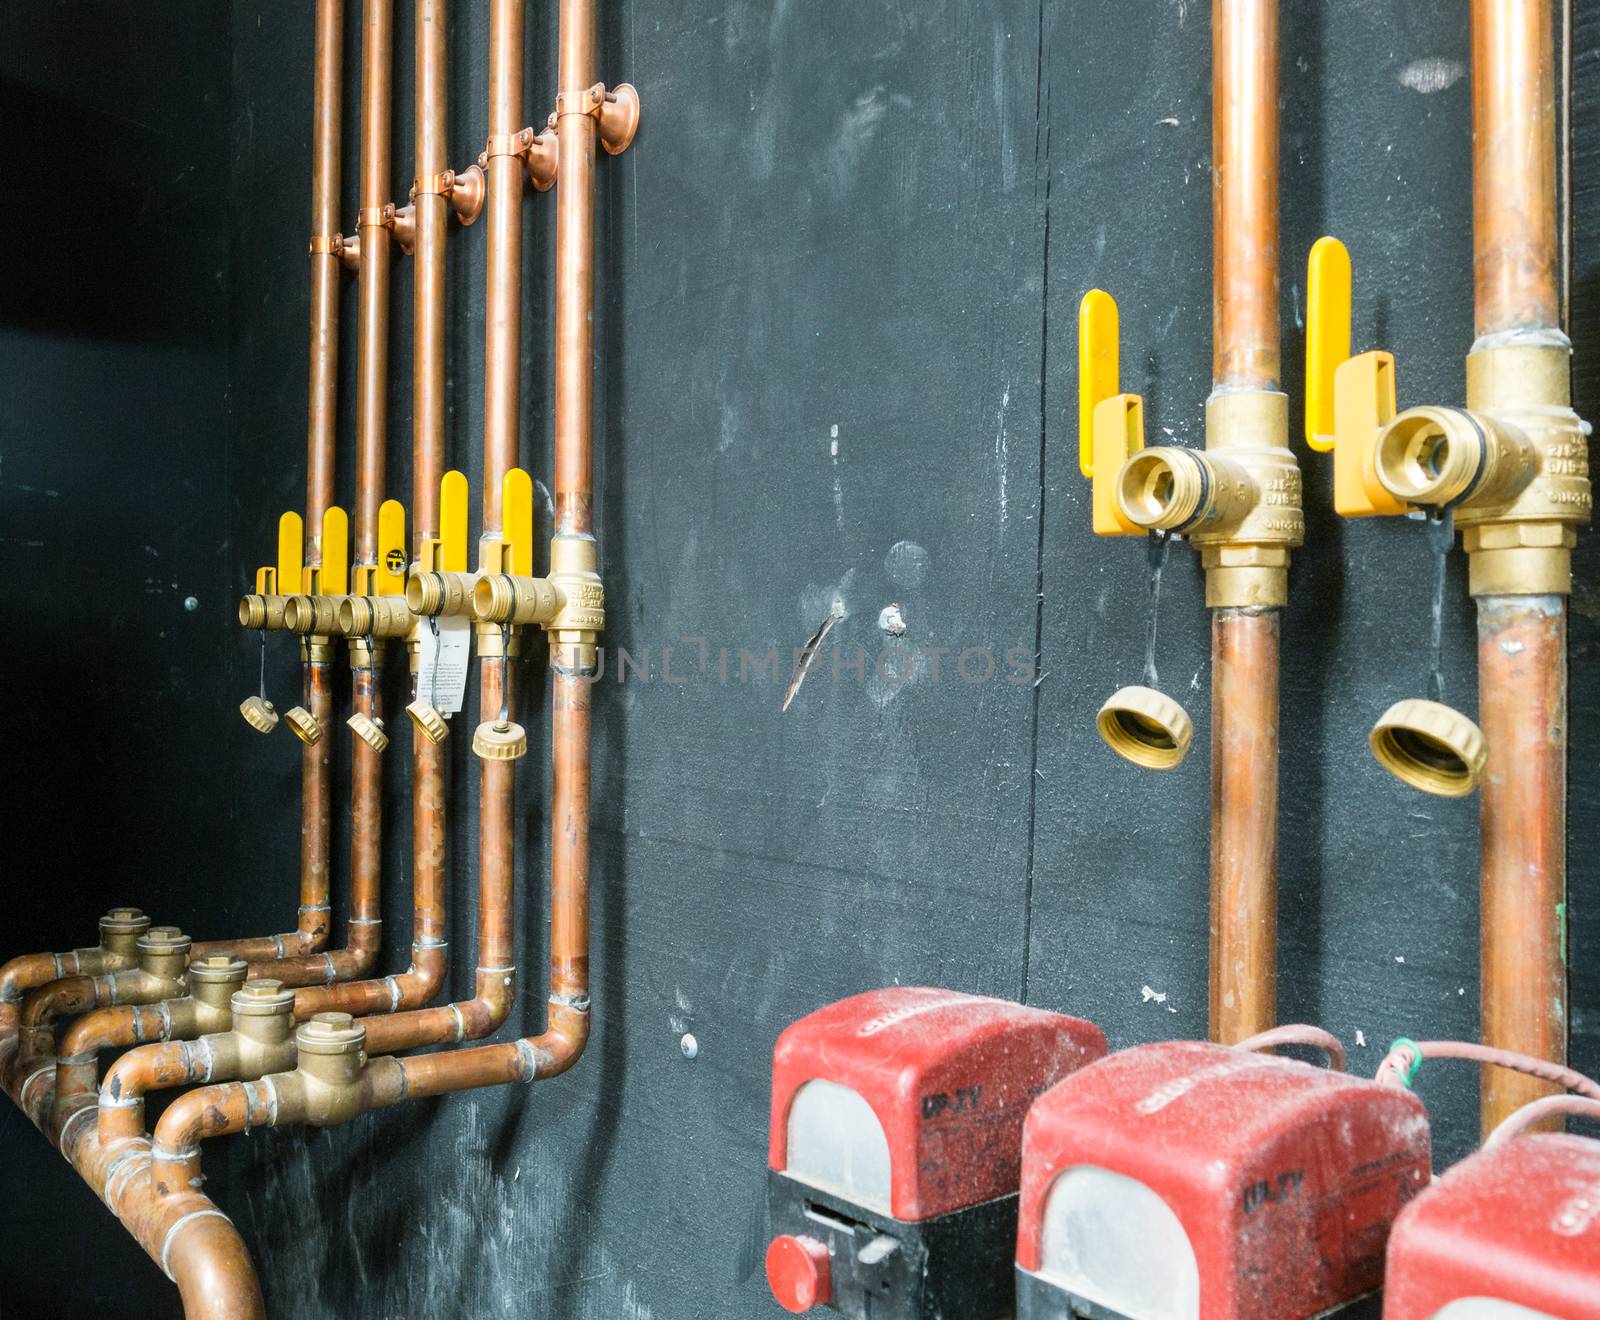 Row of copper pipes and valves by wit_gorski